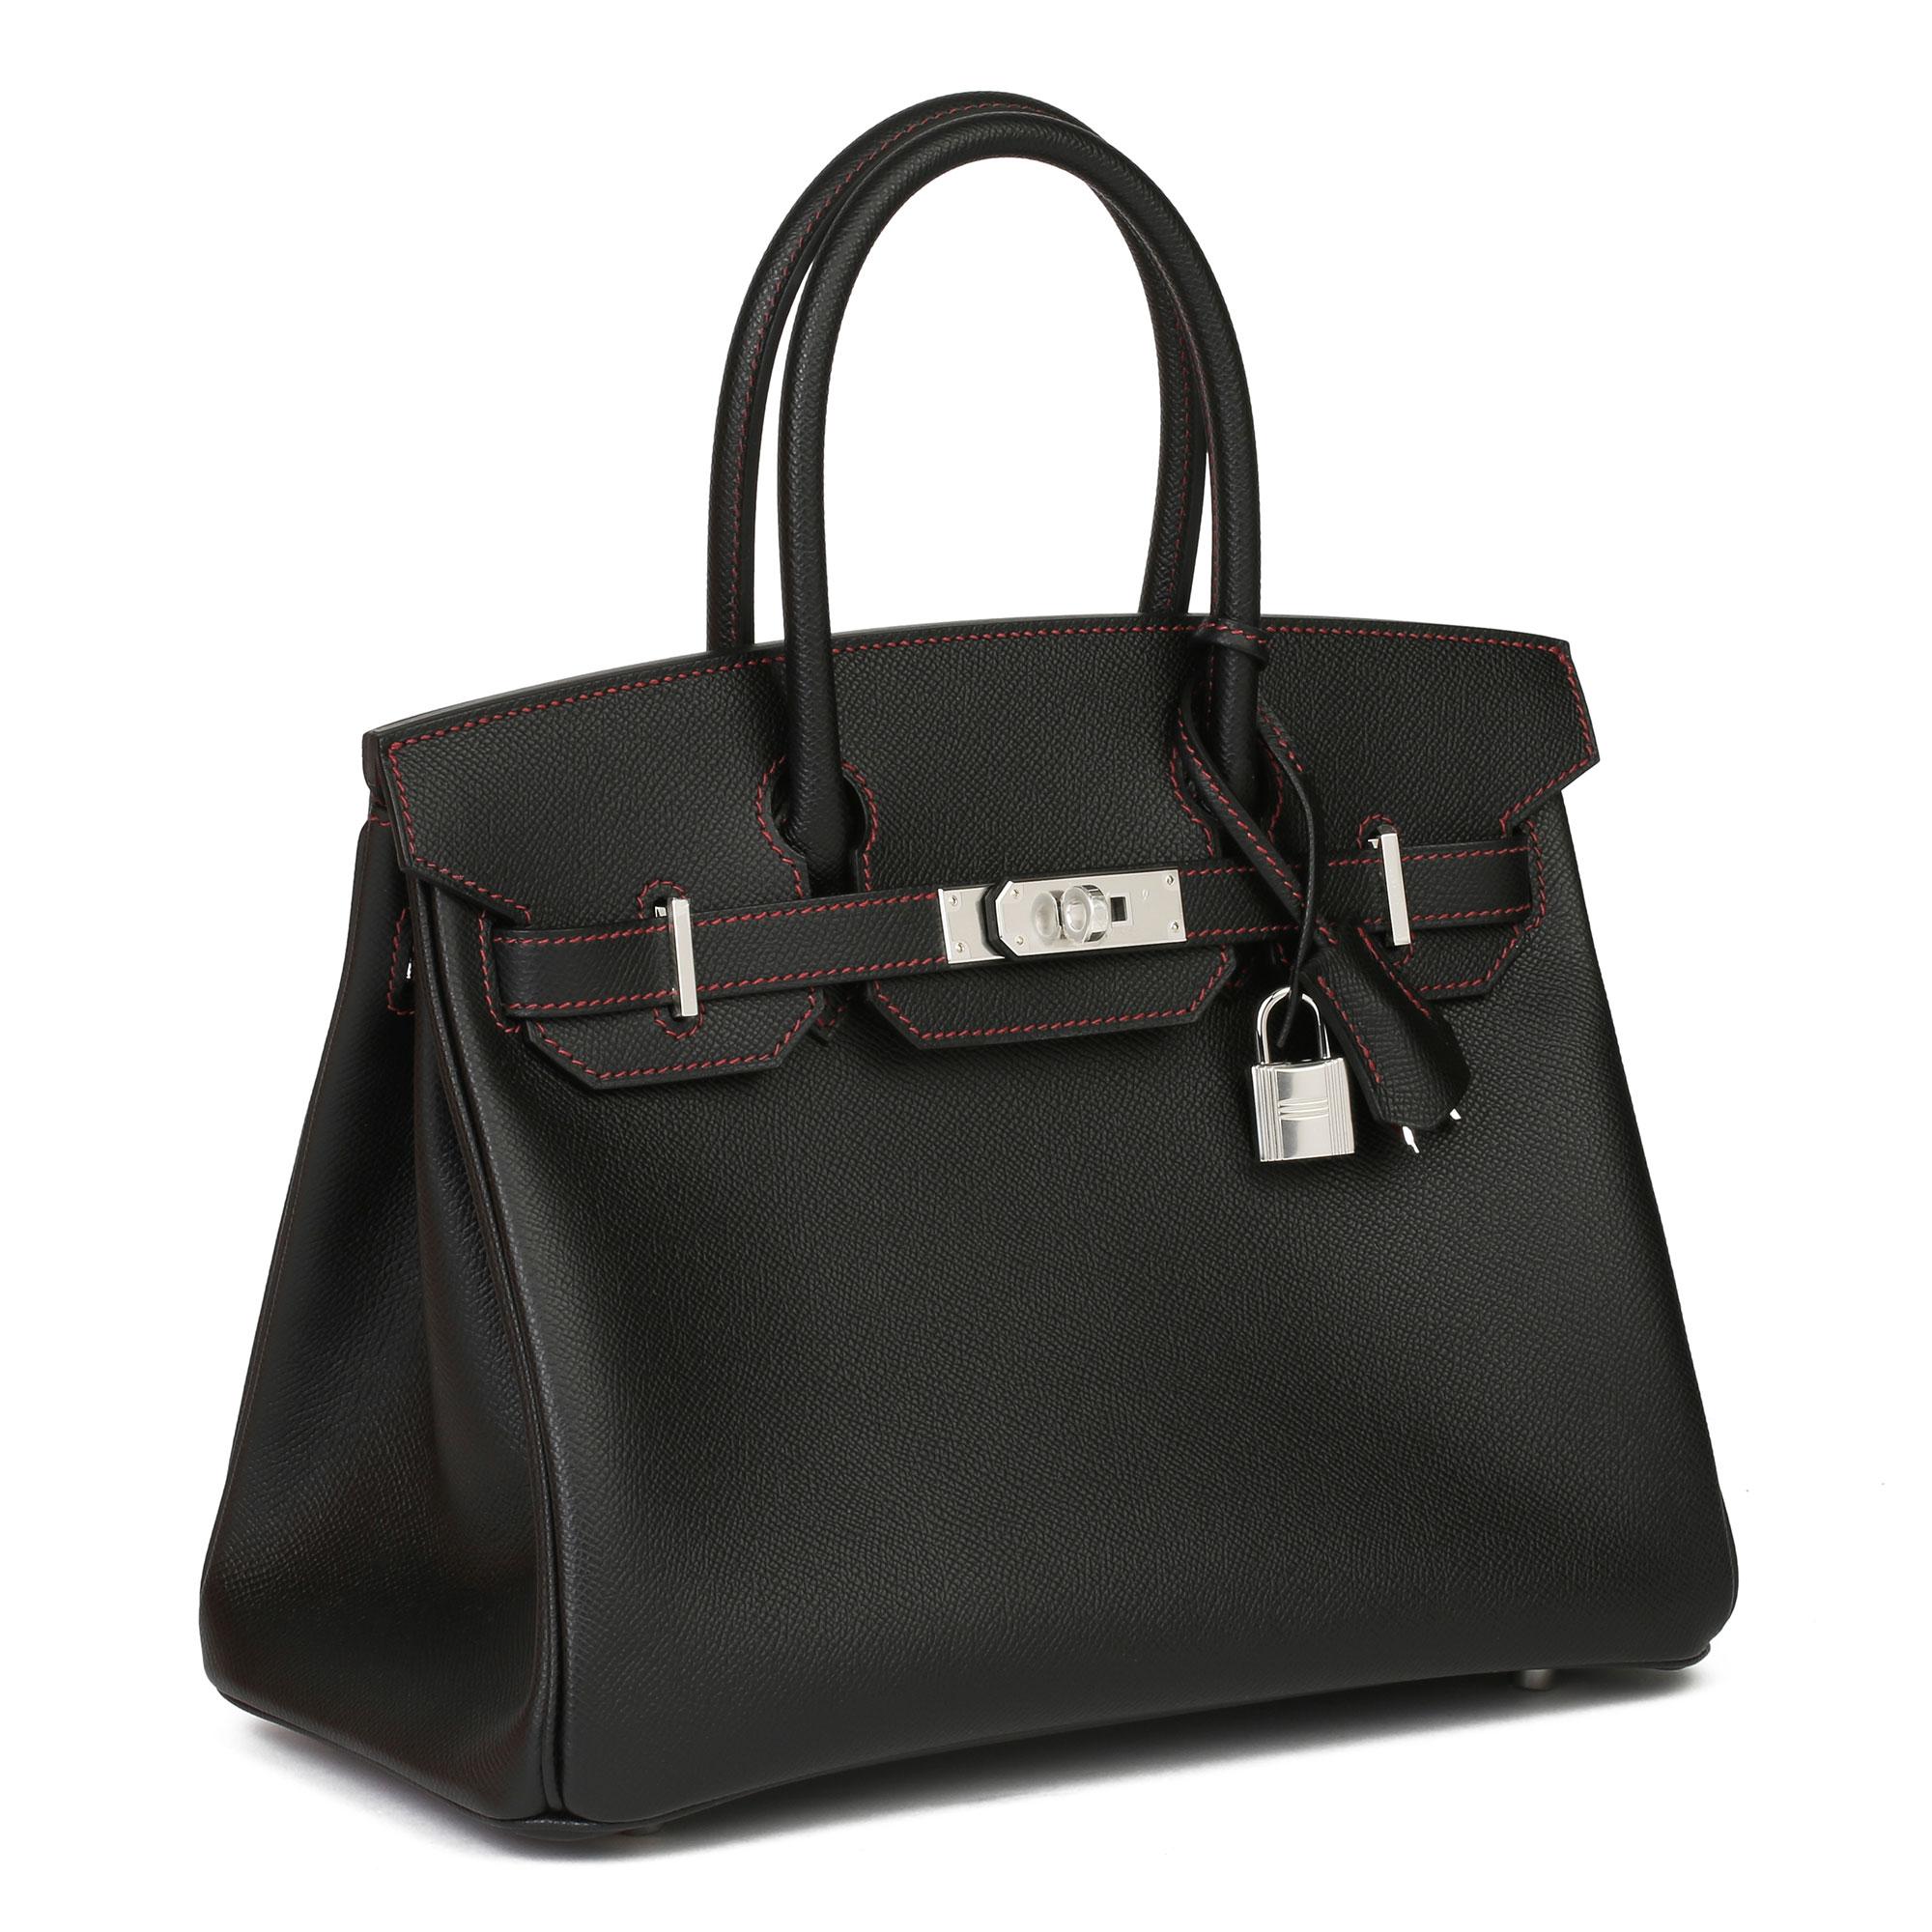 HERMÈS
Black Epsom Leather & Rouge H Contrast Stitch Special Order HSS Birkin

Xupes Reference: JJLG049
Serial Number: Z
Age (Circa): 2021
Accompanied By: Hermès Dust Bag, Box, Padlock, Keys, Clochette, Care Booklet, Protective Felt, Rain Cover,